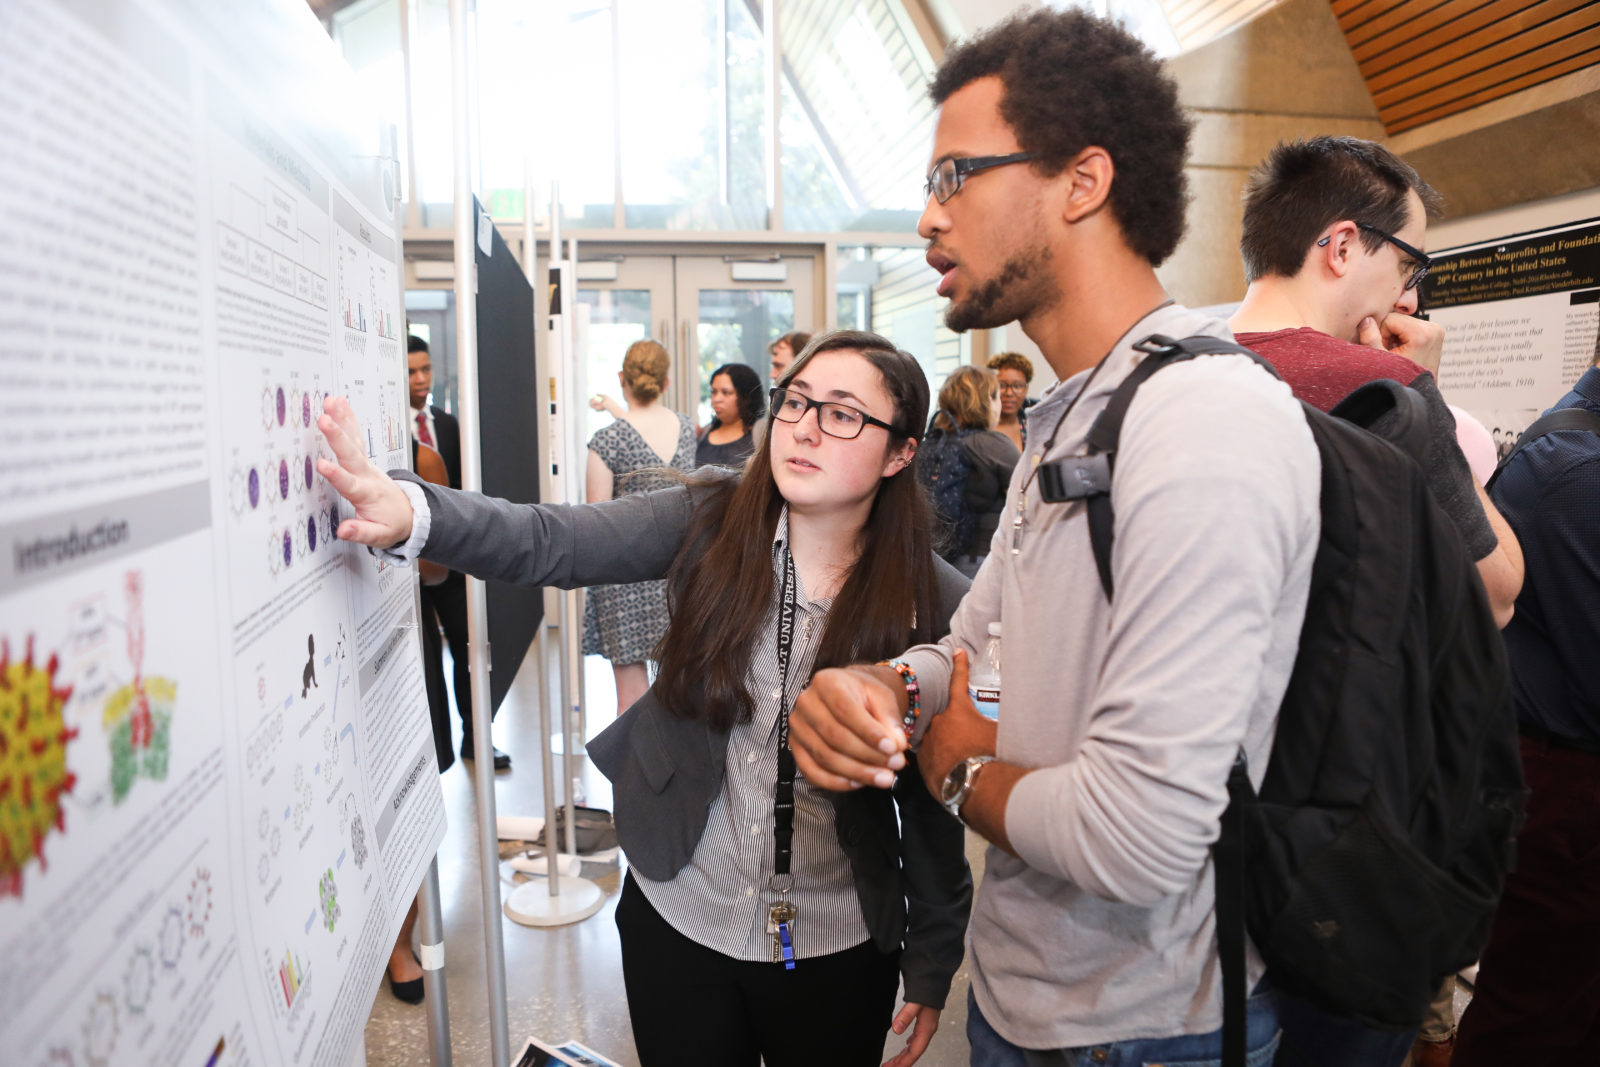 Student presenting at the 17th Annual VSSA Student Research Symposium includes a poster session and oral presentations. Photos by: Susan Urmy